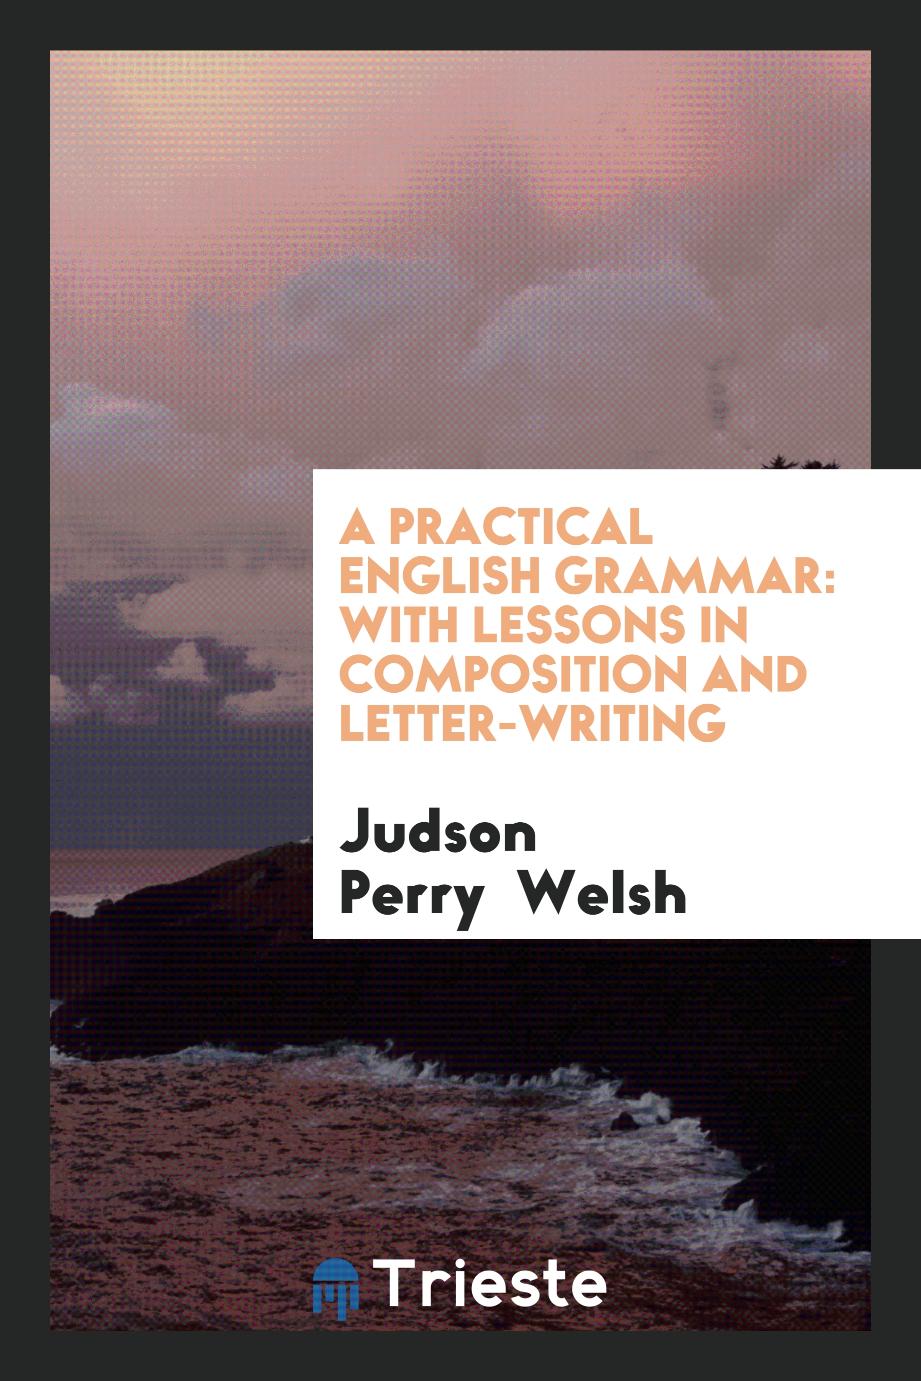 Judson Perry  Welsh - A Practical English Grammar: With Lessons in Composition and Letter-Writing